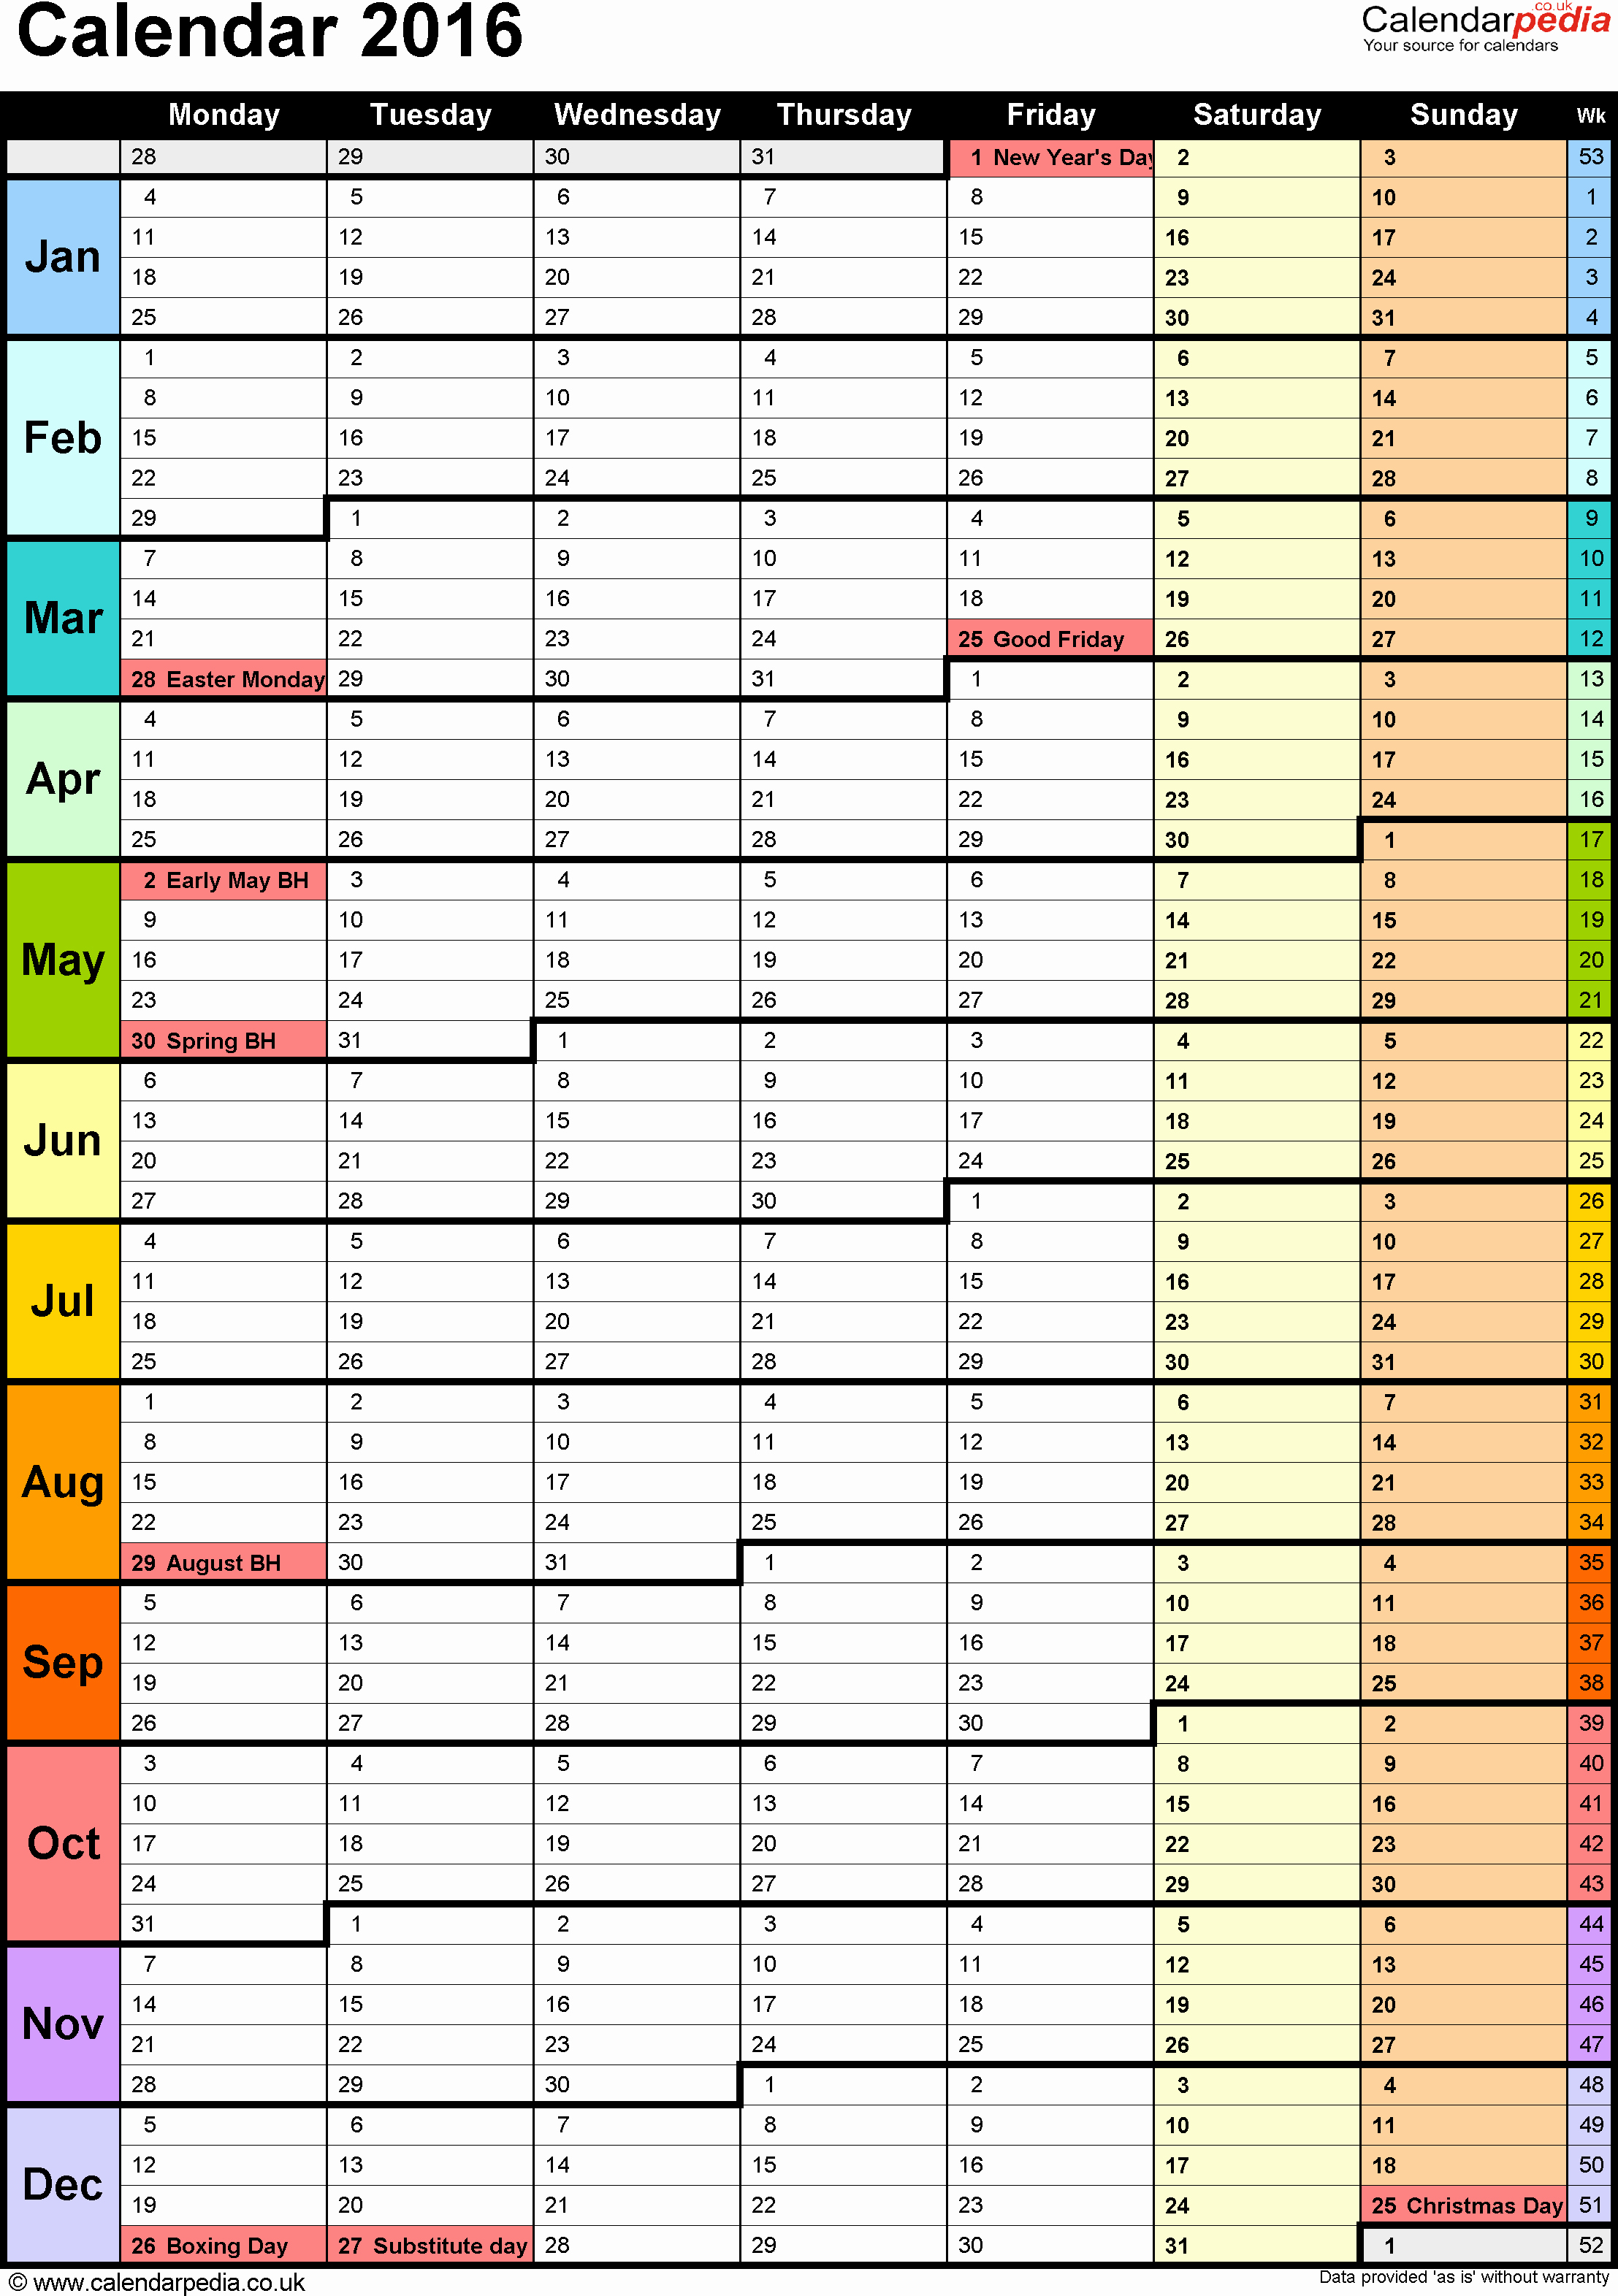 Yearly Calendar Template